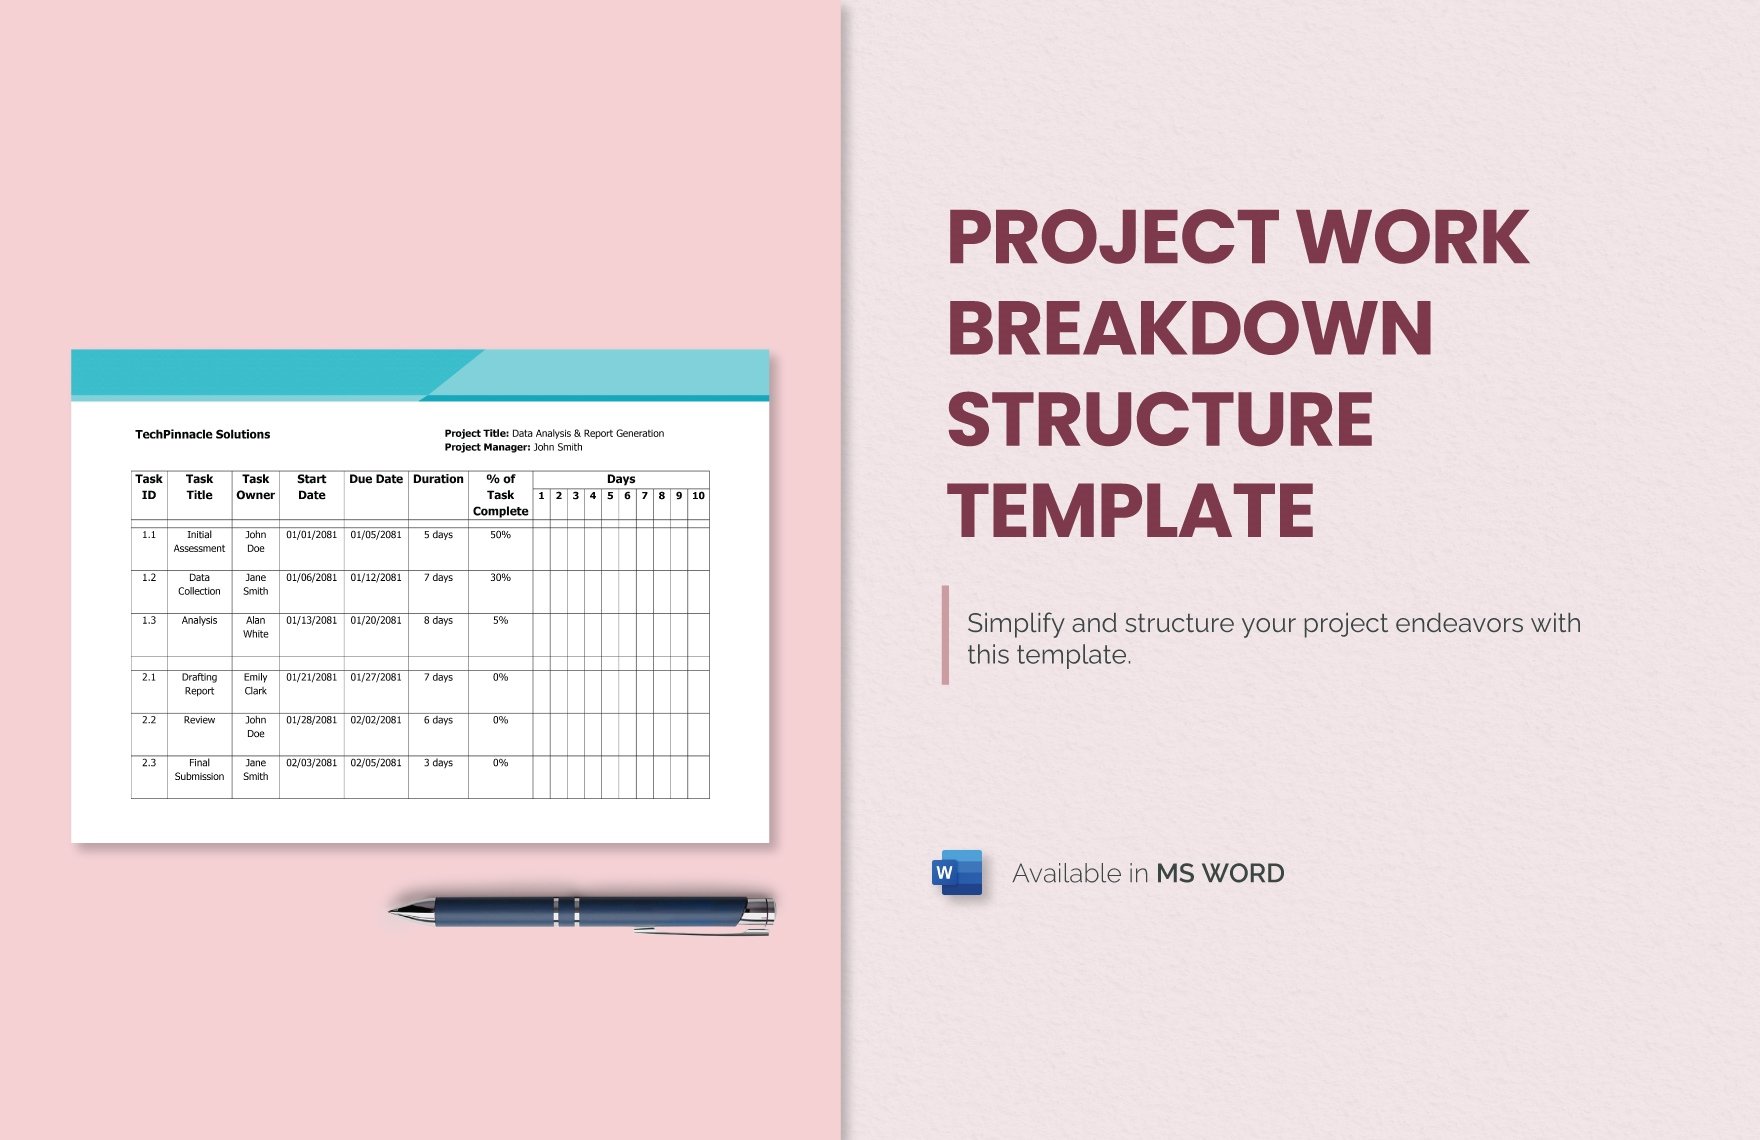 Project Work Breakdown Structure Template in Word